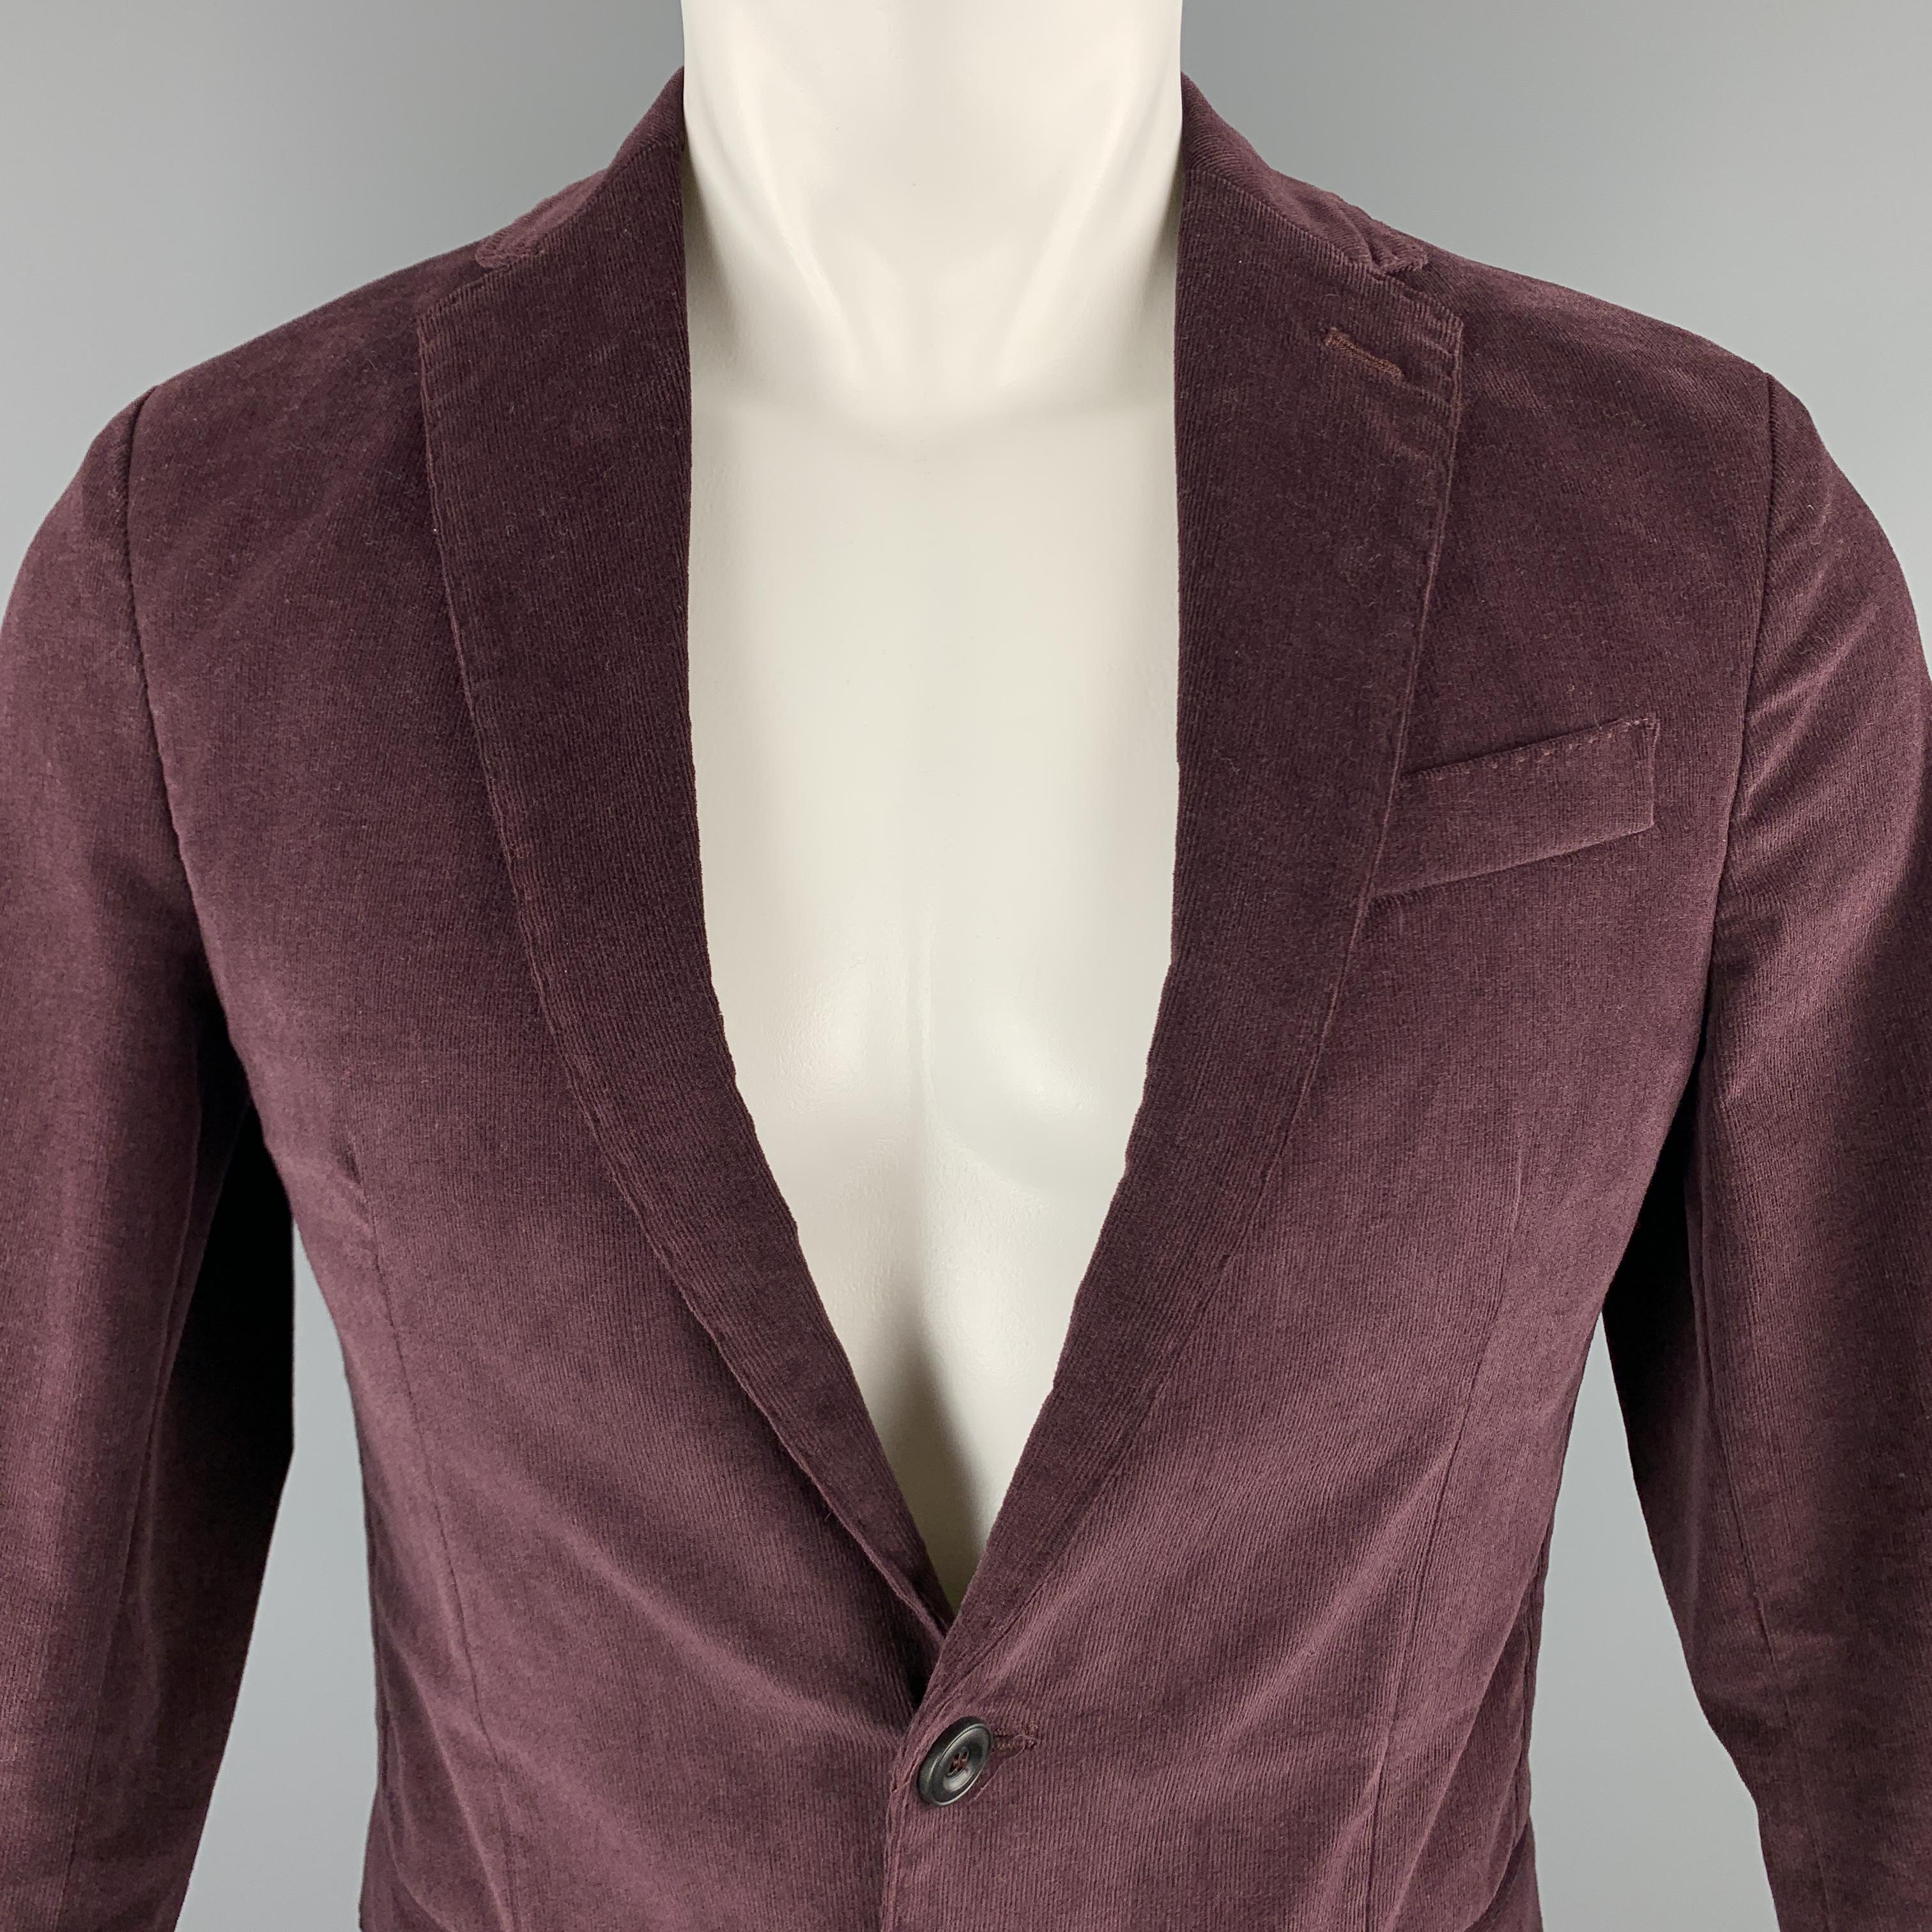 MESSAGERIE sport coat comes in a solid burgundy cotton / elastane corduroy material, featuring a notch lapel, slit and flap pockets, two buttons at closure, single breasted, buttoned cuffs, a double vent at back, unlined. Made in Italy. 

Excellent